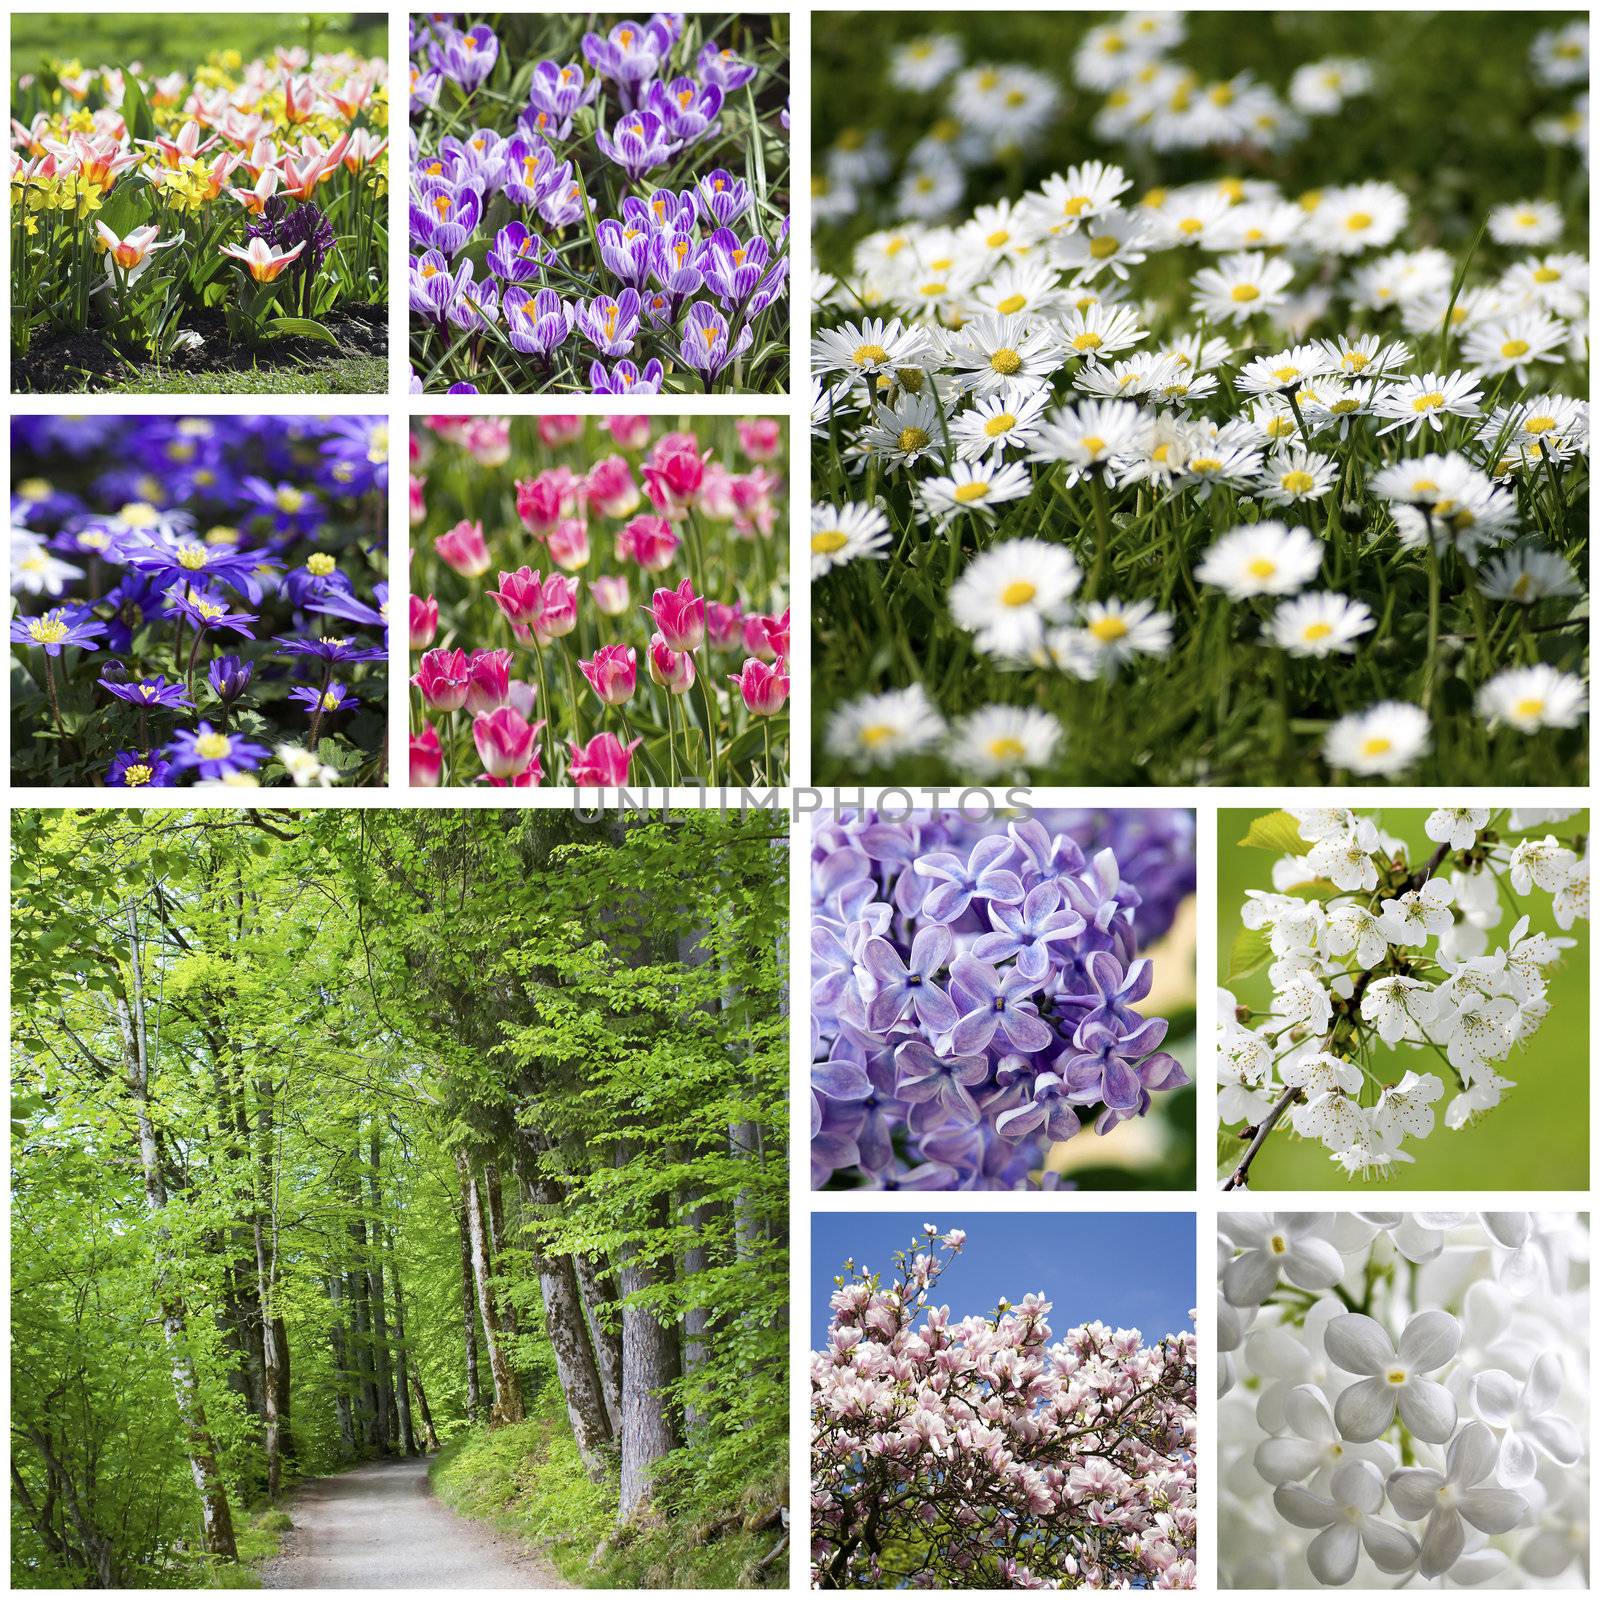 Collage with spring flowers by miradrozdowski